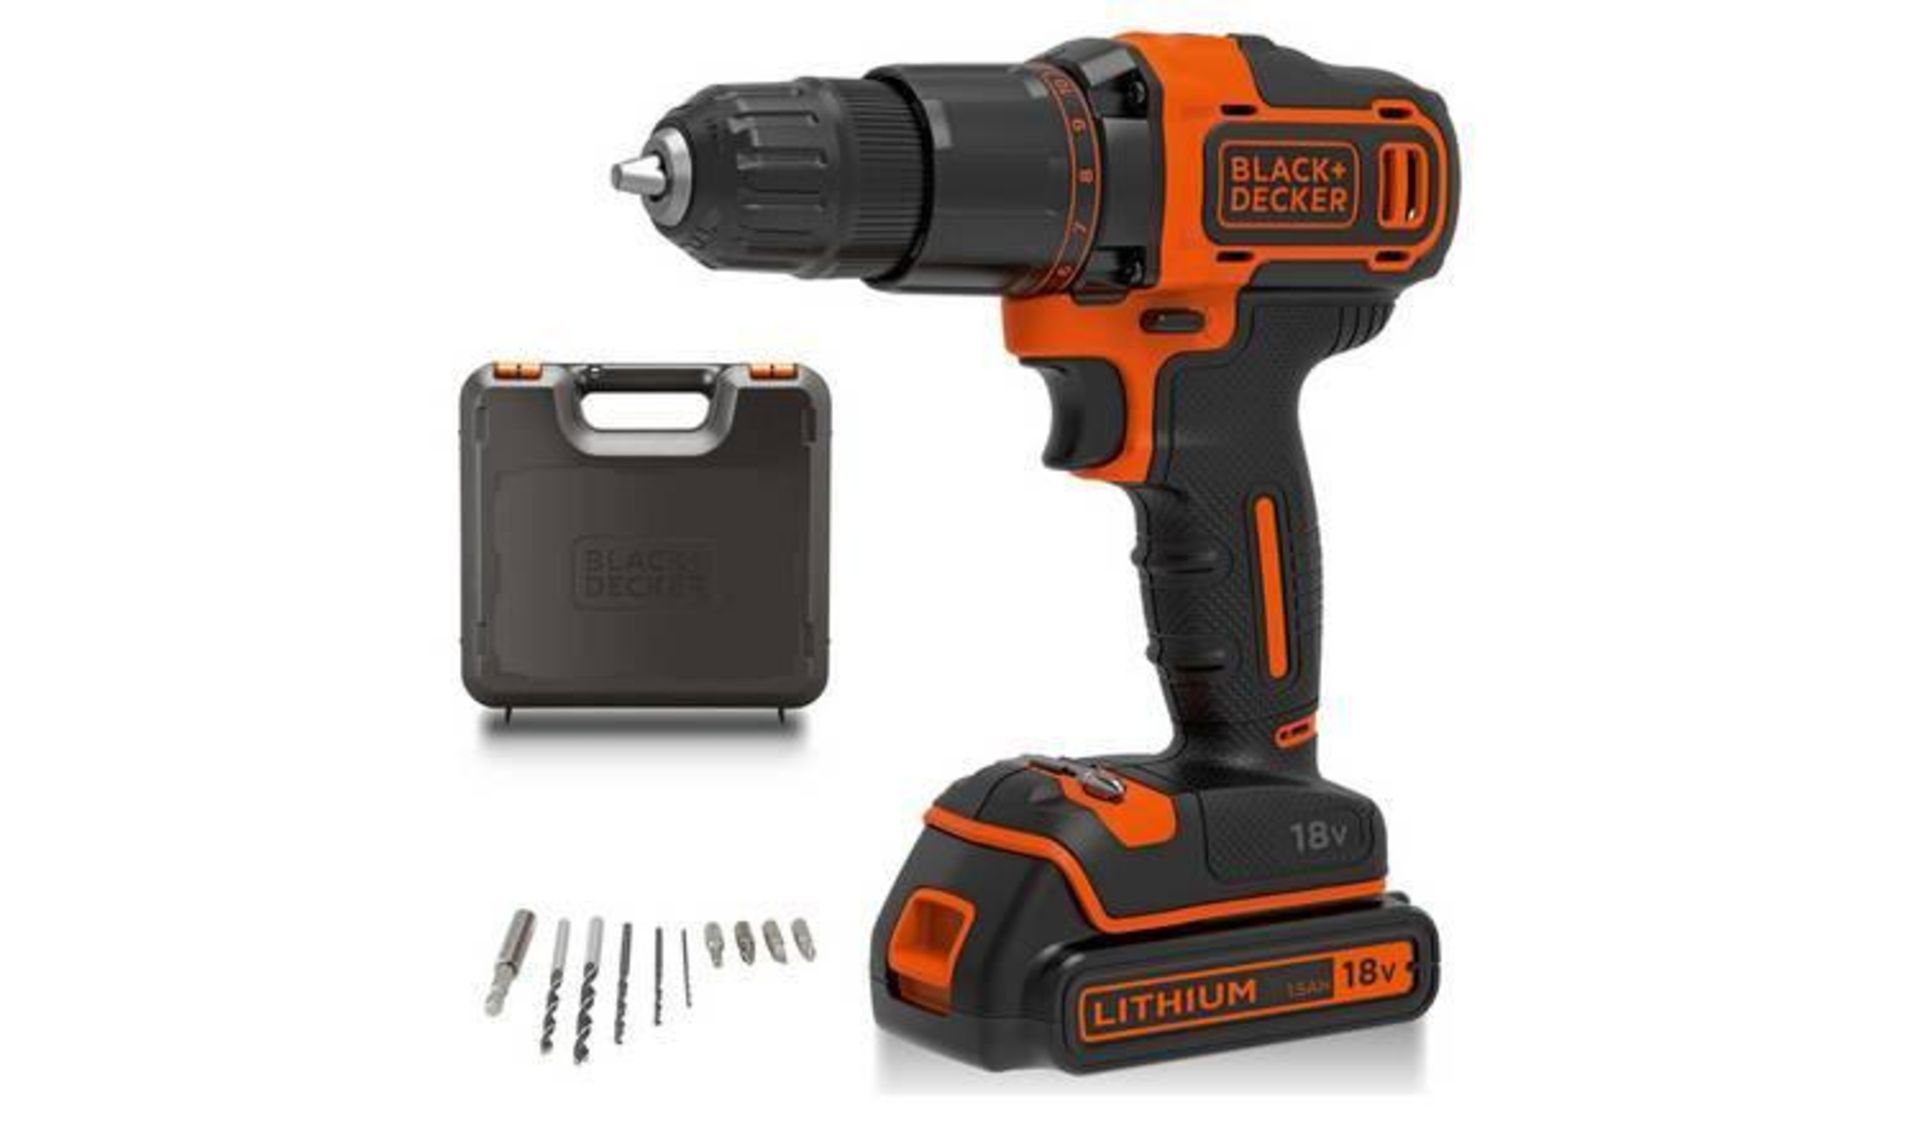 Black + Decker Cordless Hammer Drill with Battery - 18V (826/0385) - £50.00 RRP